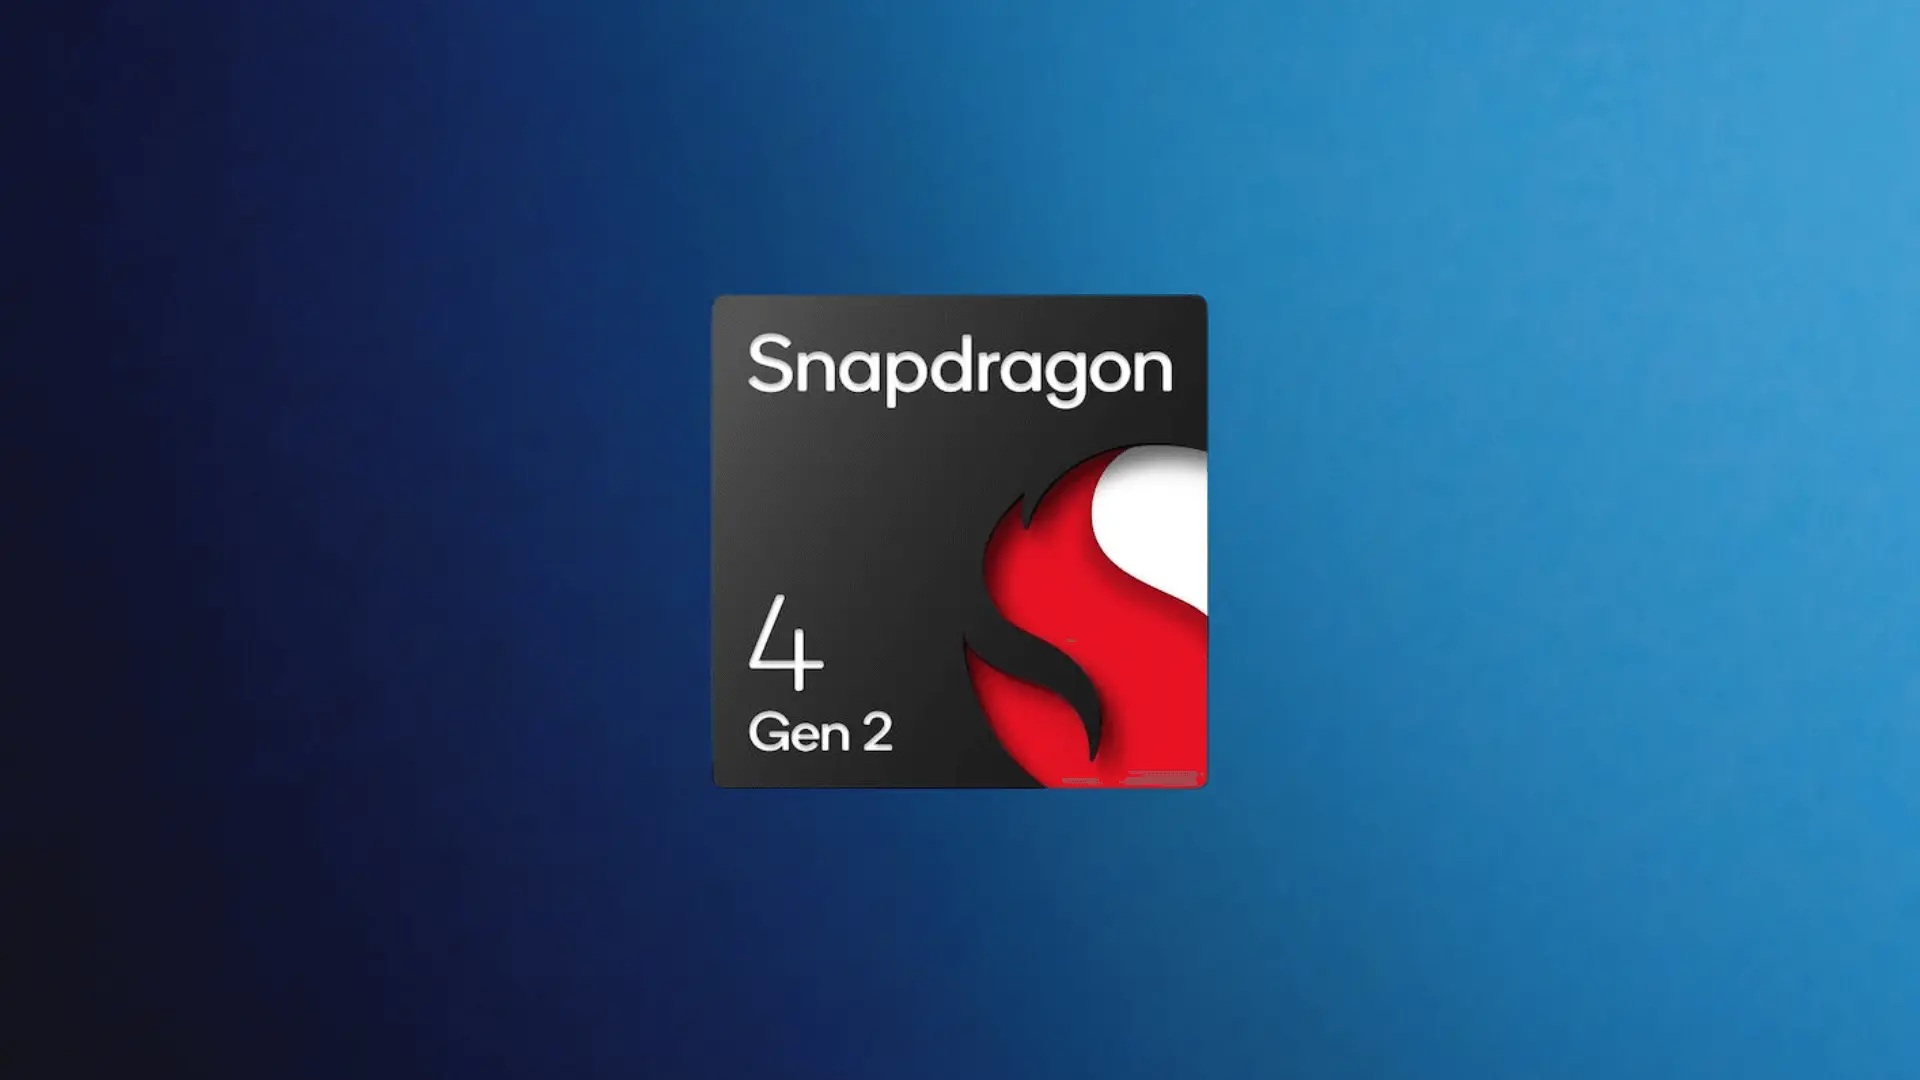 Snapdragon 4 Gen 2 Unveiled 4nm Chip With Faster RAM and Storage (1)